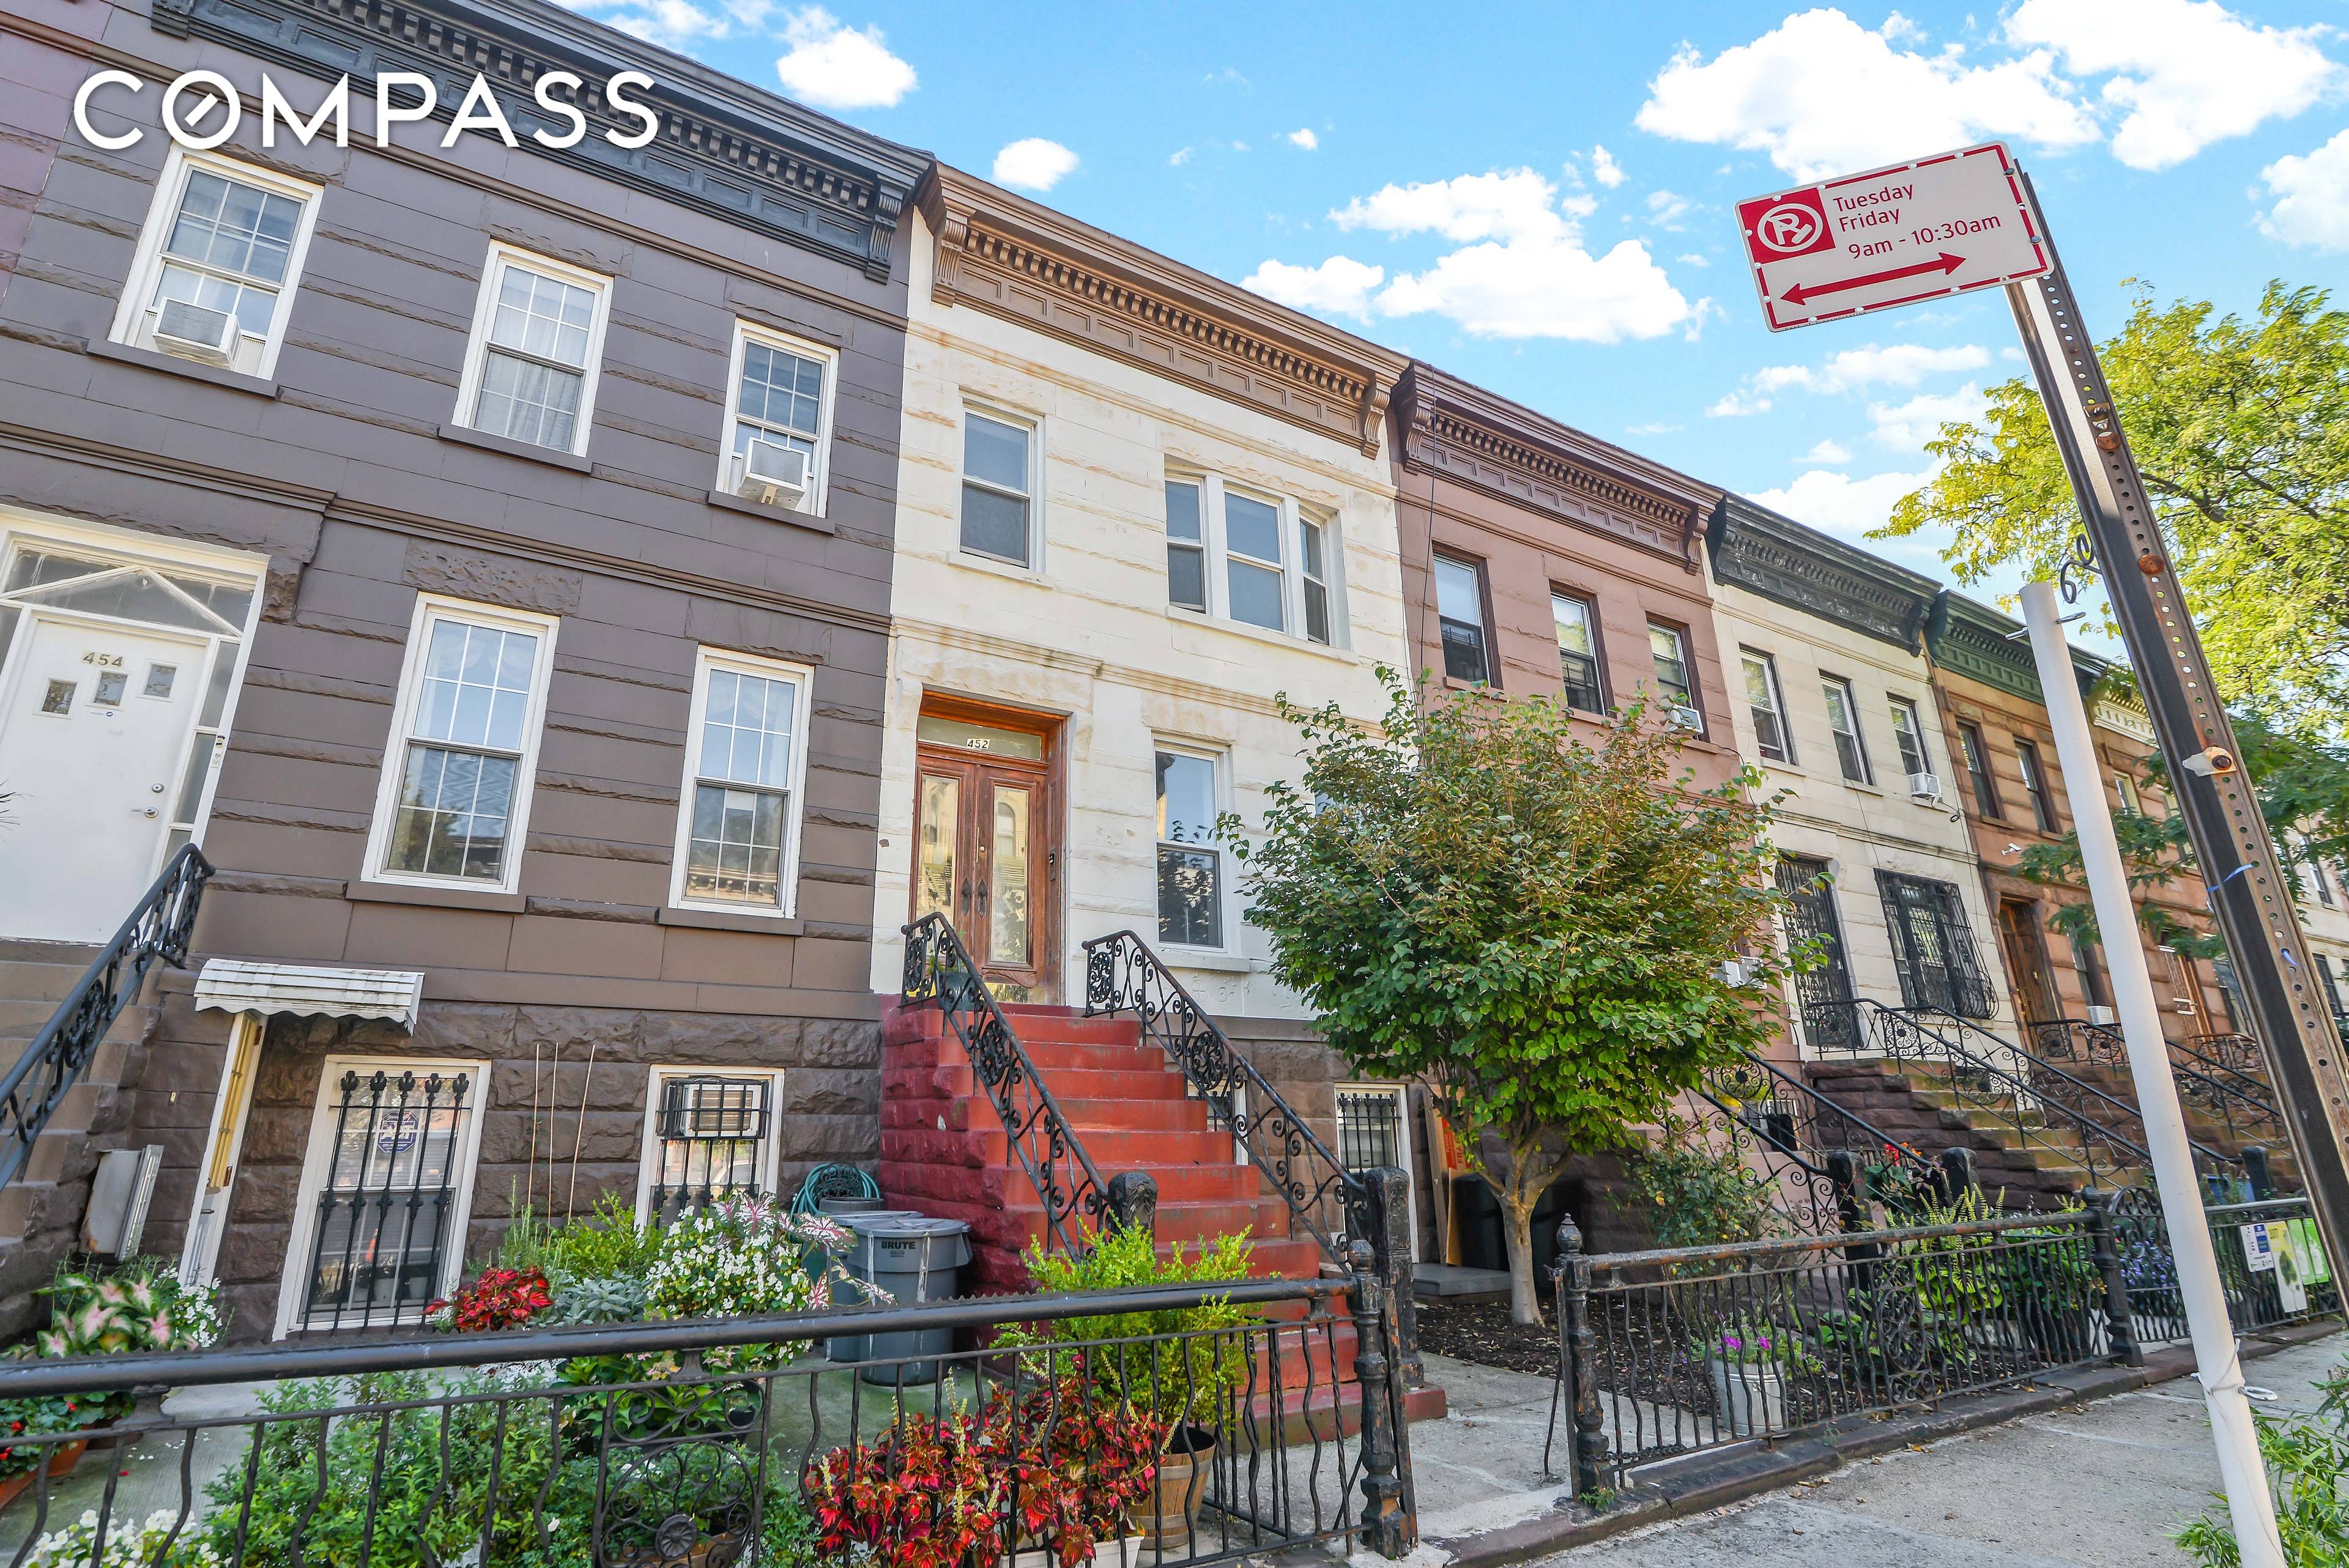 452 Bainbridge is a stunning three story, two family brownstone, filled with circa 1899 charm.